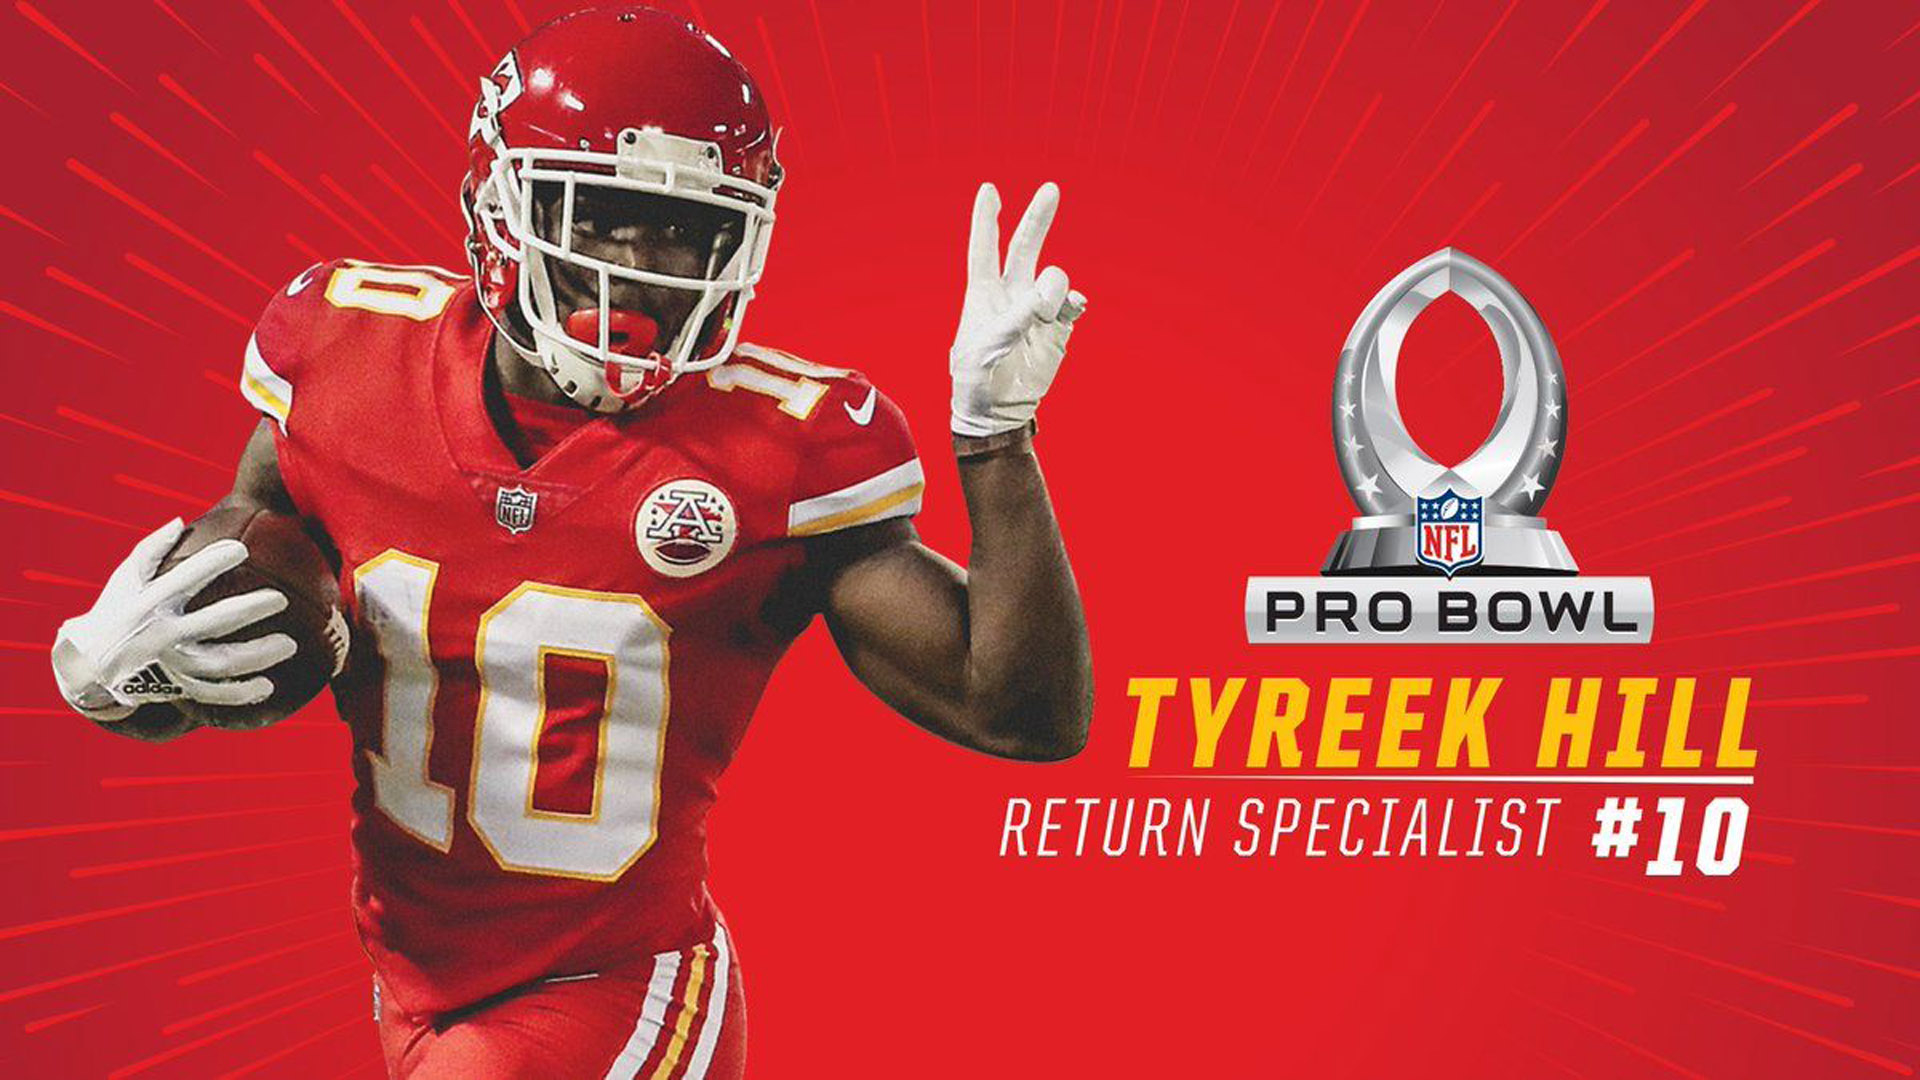 Tyreek Hill Is Showing Victory Sign Symbol Wearing Red Sports Dress And  Helmet HD Tyreek Hill Wallpapers  HD Wallpapers  ID 55694